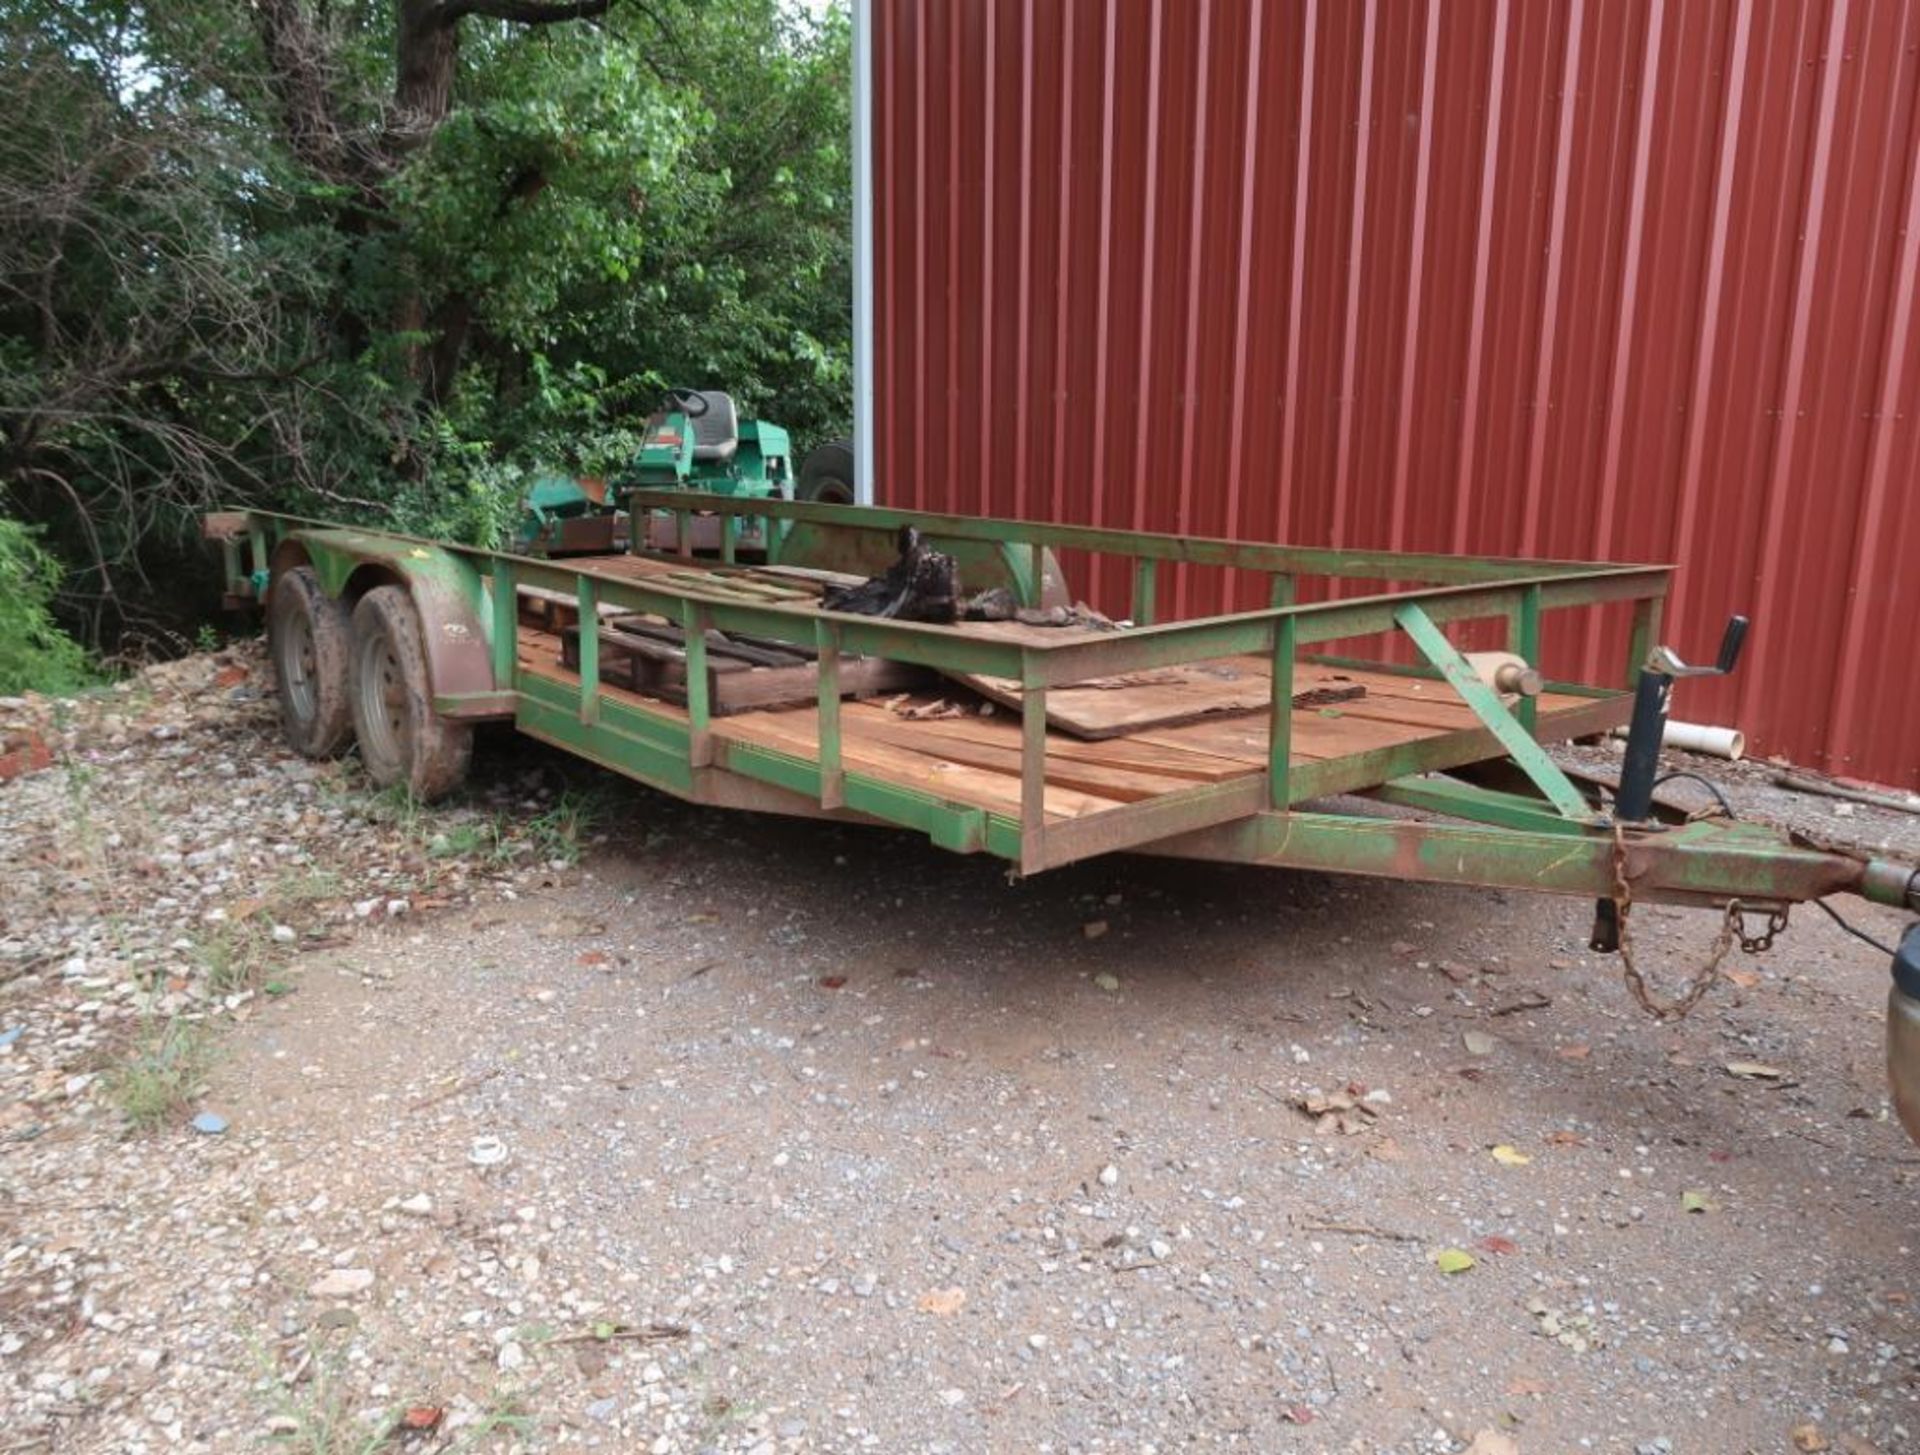 18 ft. Tandem-Axle Utility Trailer, VIN 1MAU18248W035730 - Image 4 of 8